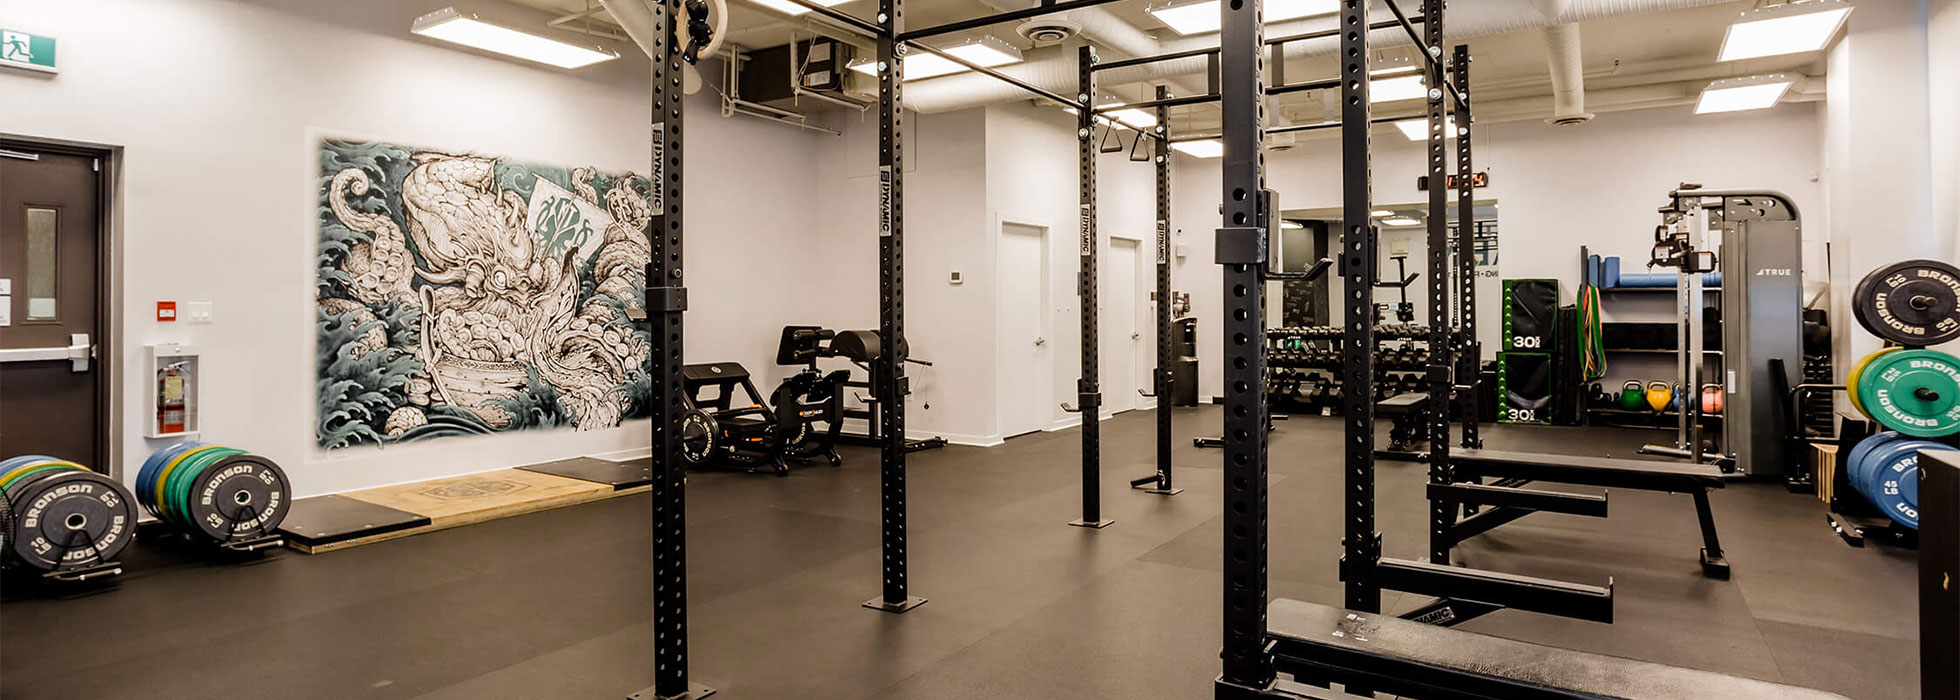 Why Kraken Fitness Is Ranked One of the Best Gyms In Burnaby